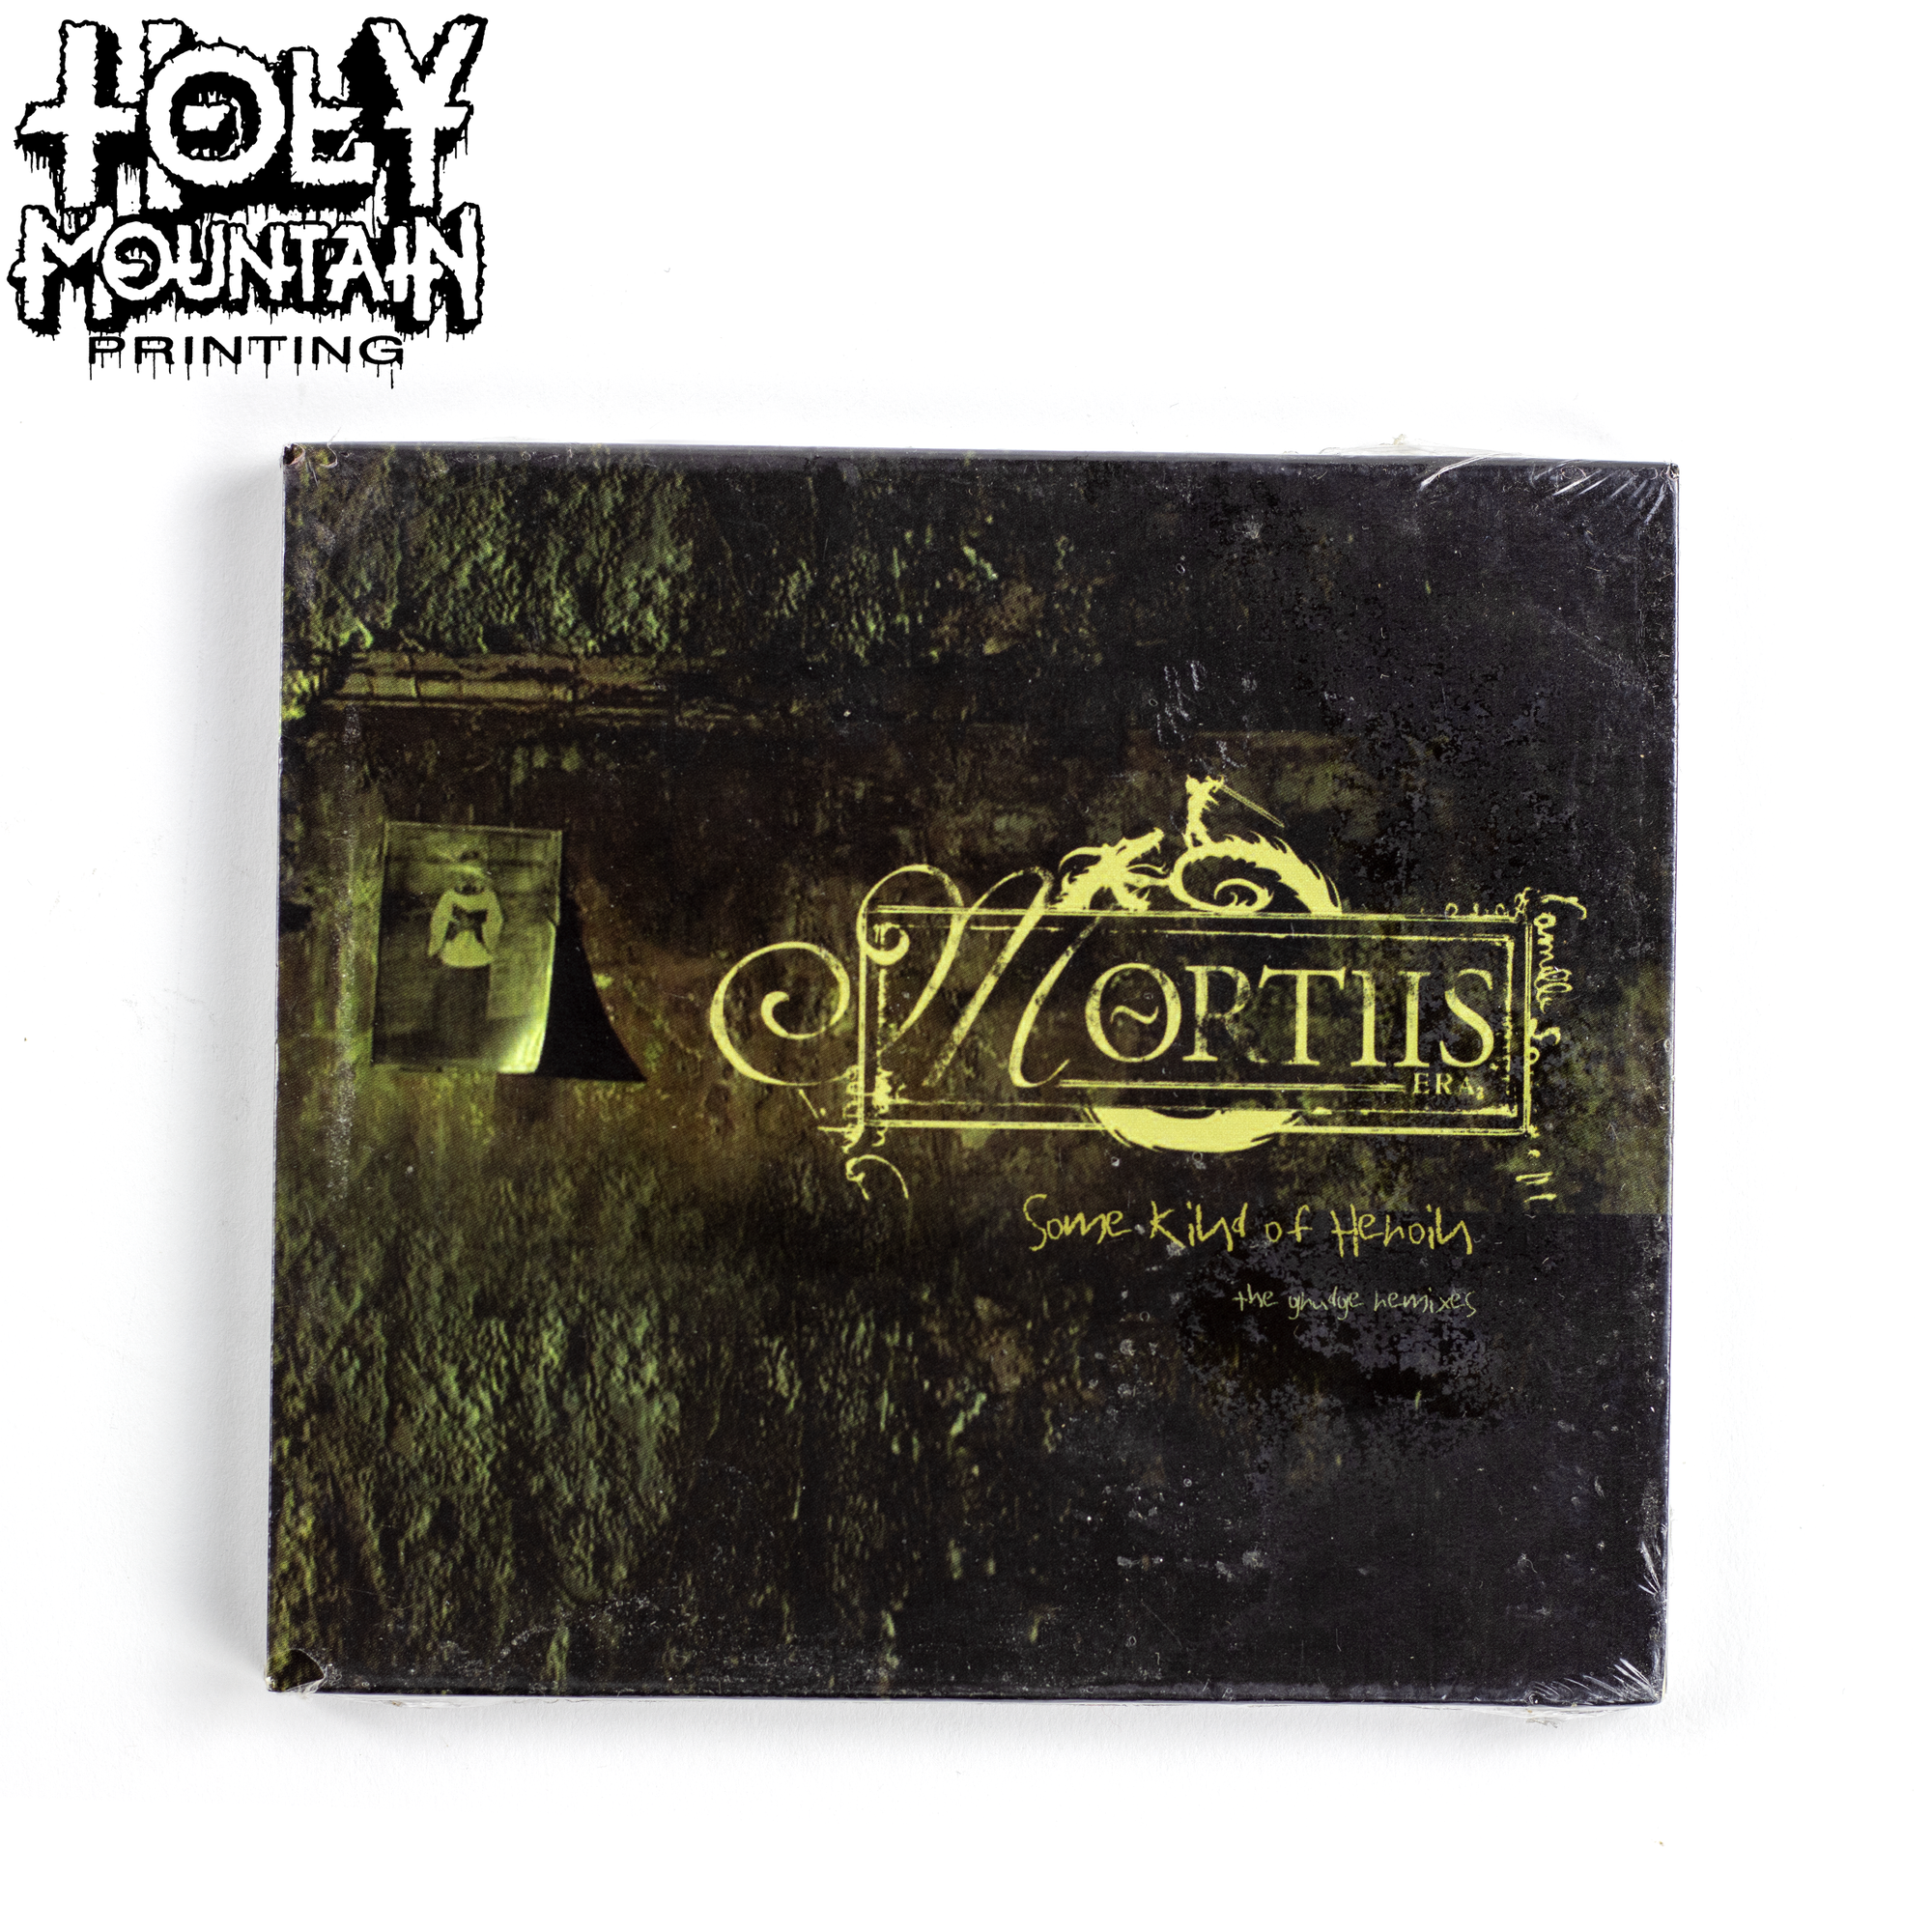 MORTIIS " Some Kind Of Heroin (The Grudge Remixes)" CD